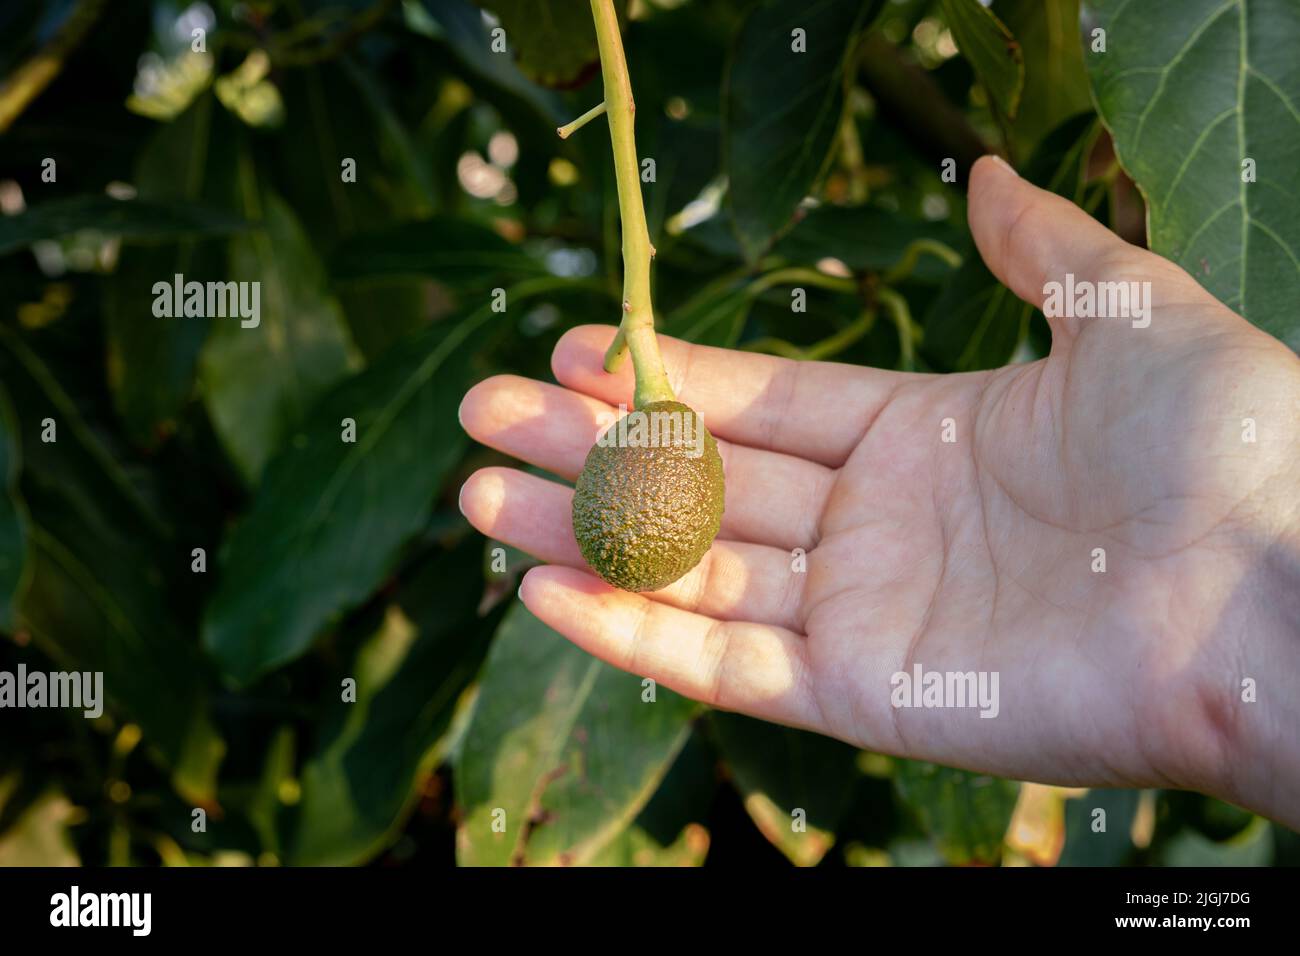 Close-up of farmer's hand and a young hass avocado hanging on a tree in the orchard with natural sunlight Stock Photo